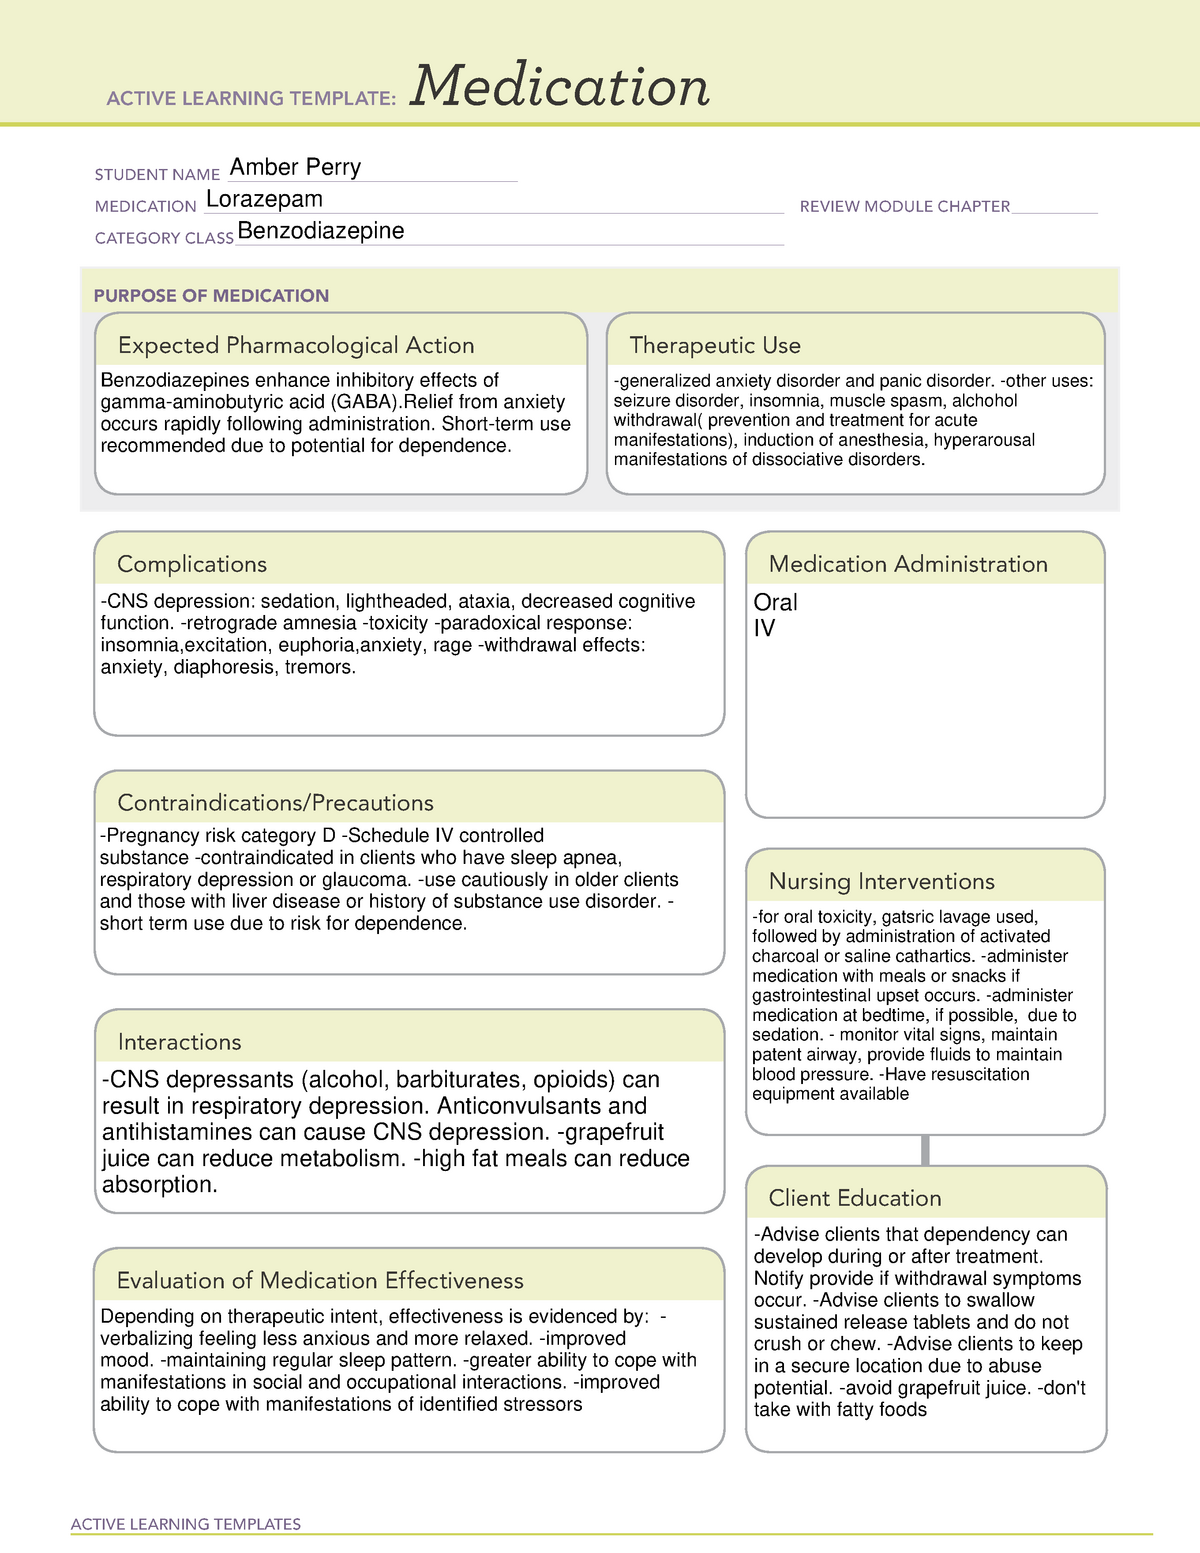 ATI med lorazepam template ACTIVE LEARNING TEMPLATES Medication